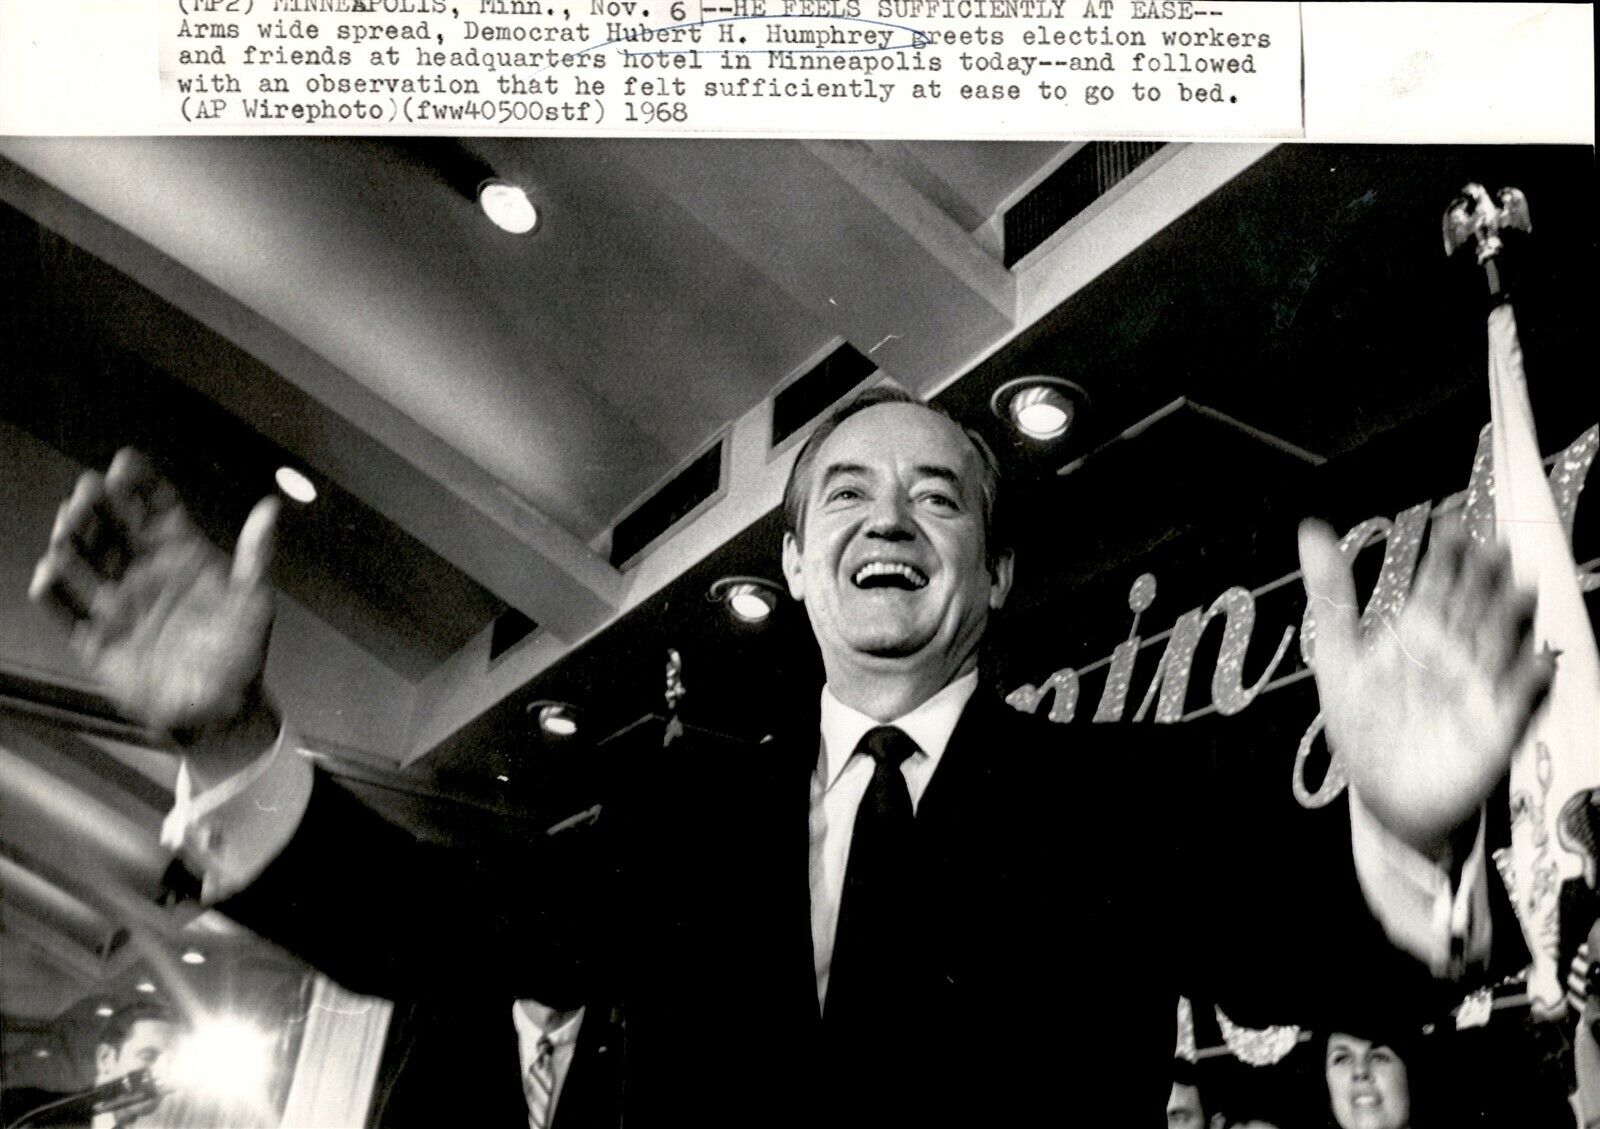 LG947 1968 AP Wire Photo HE FEELS SUFFICIENTLY AT EASE DEMOCRAT HUBERT HUMPHREY